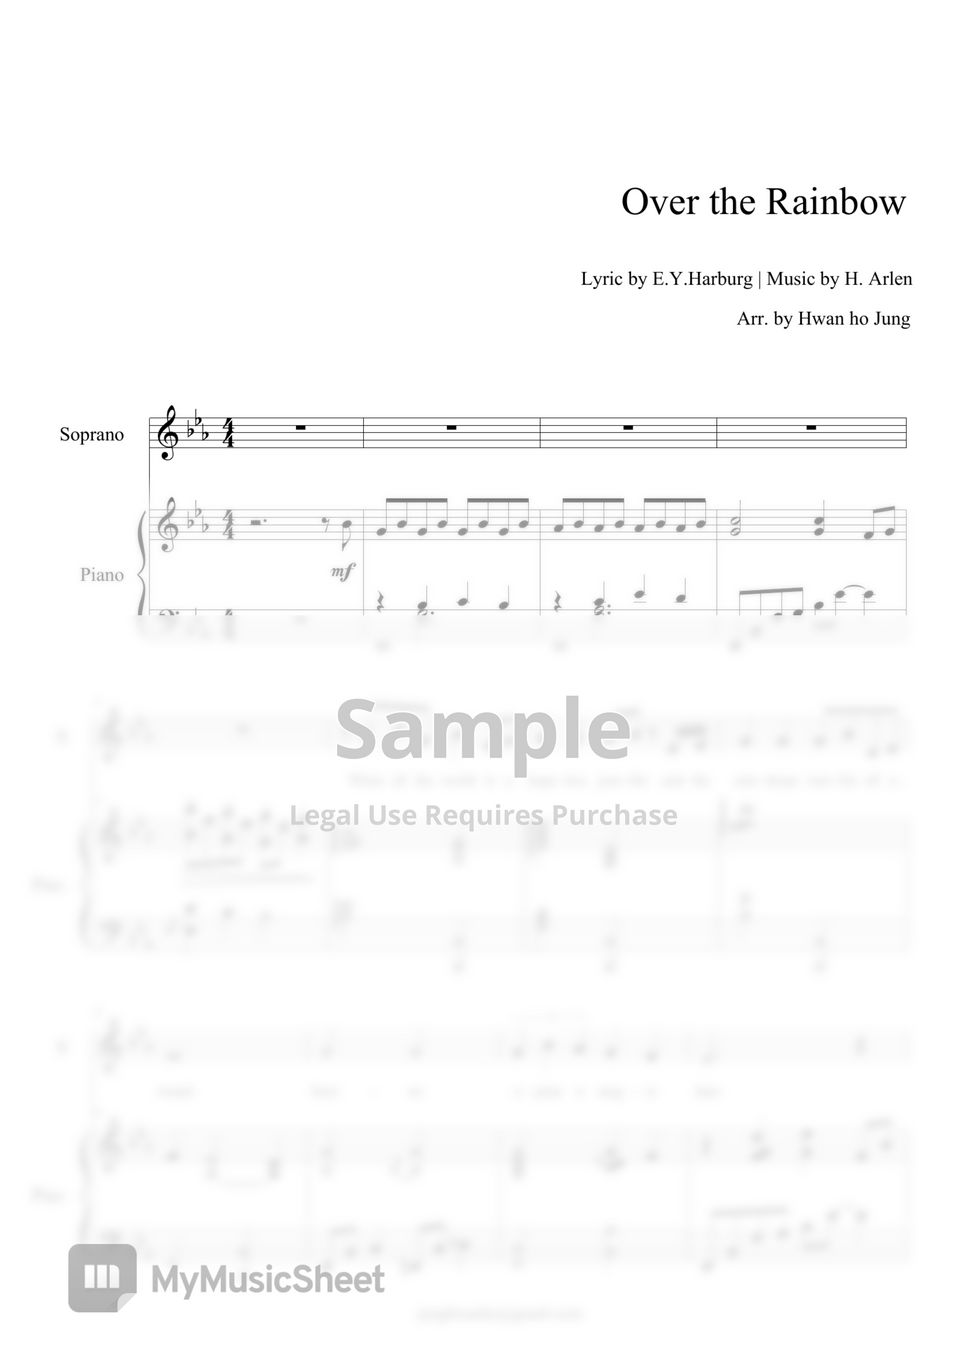 H. Arlen - Over the Rainbow (For Soprano) by Hwan ho Jung